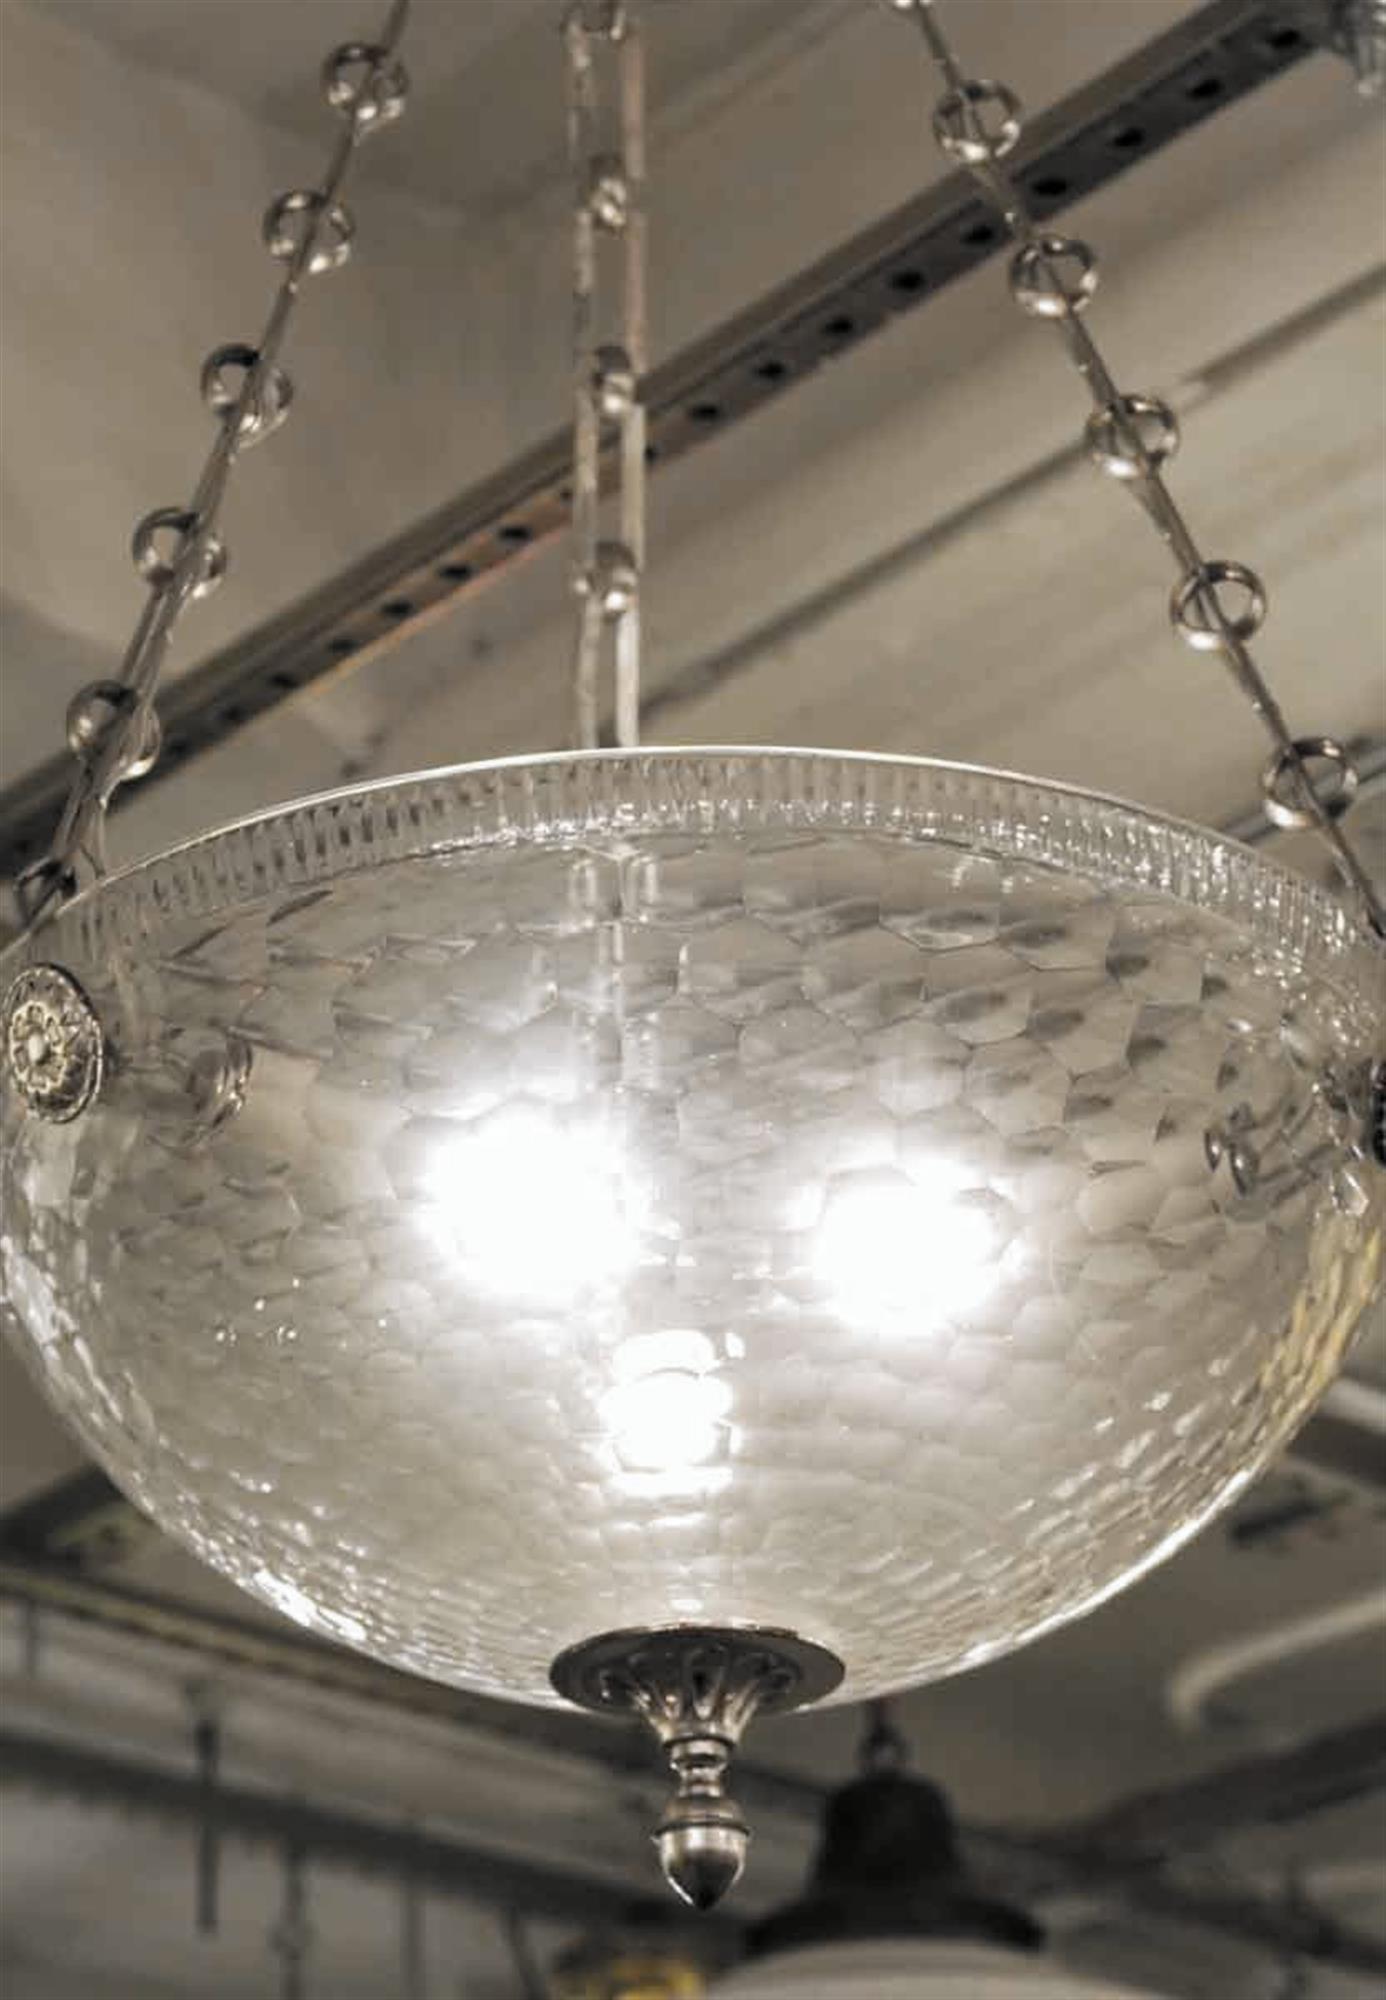 Mid-Century Modern style clear glass bowl pendant light with brushed nickel finished details and a unique chain. This can be seen at our 2420 Broadway location on the upper west side in Manhattan.